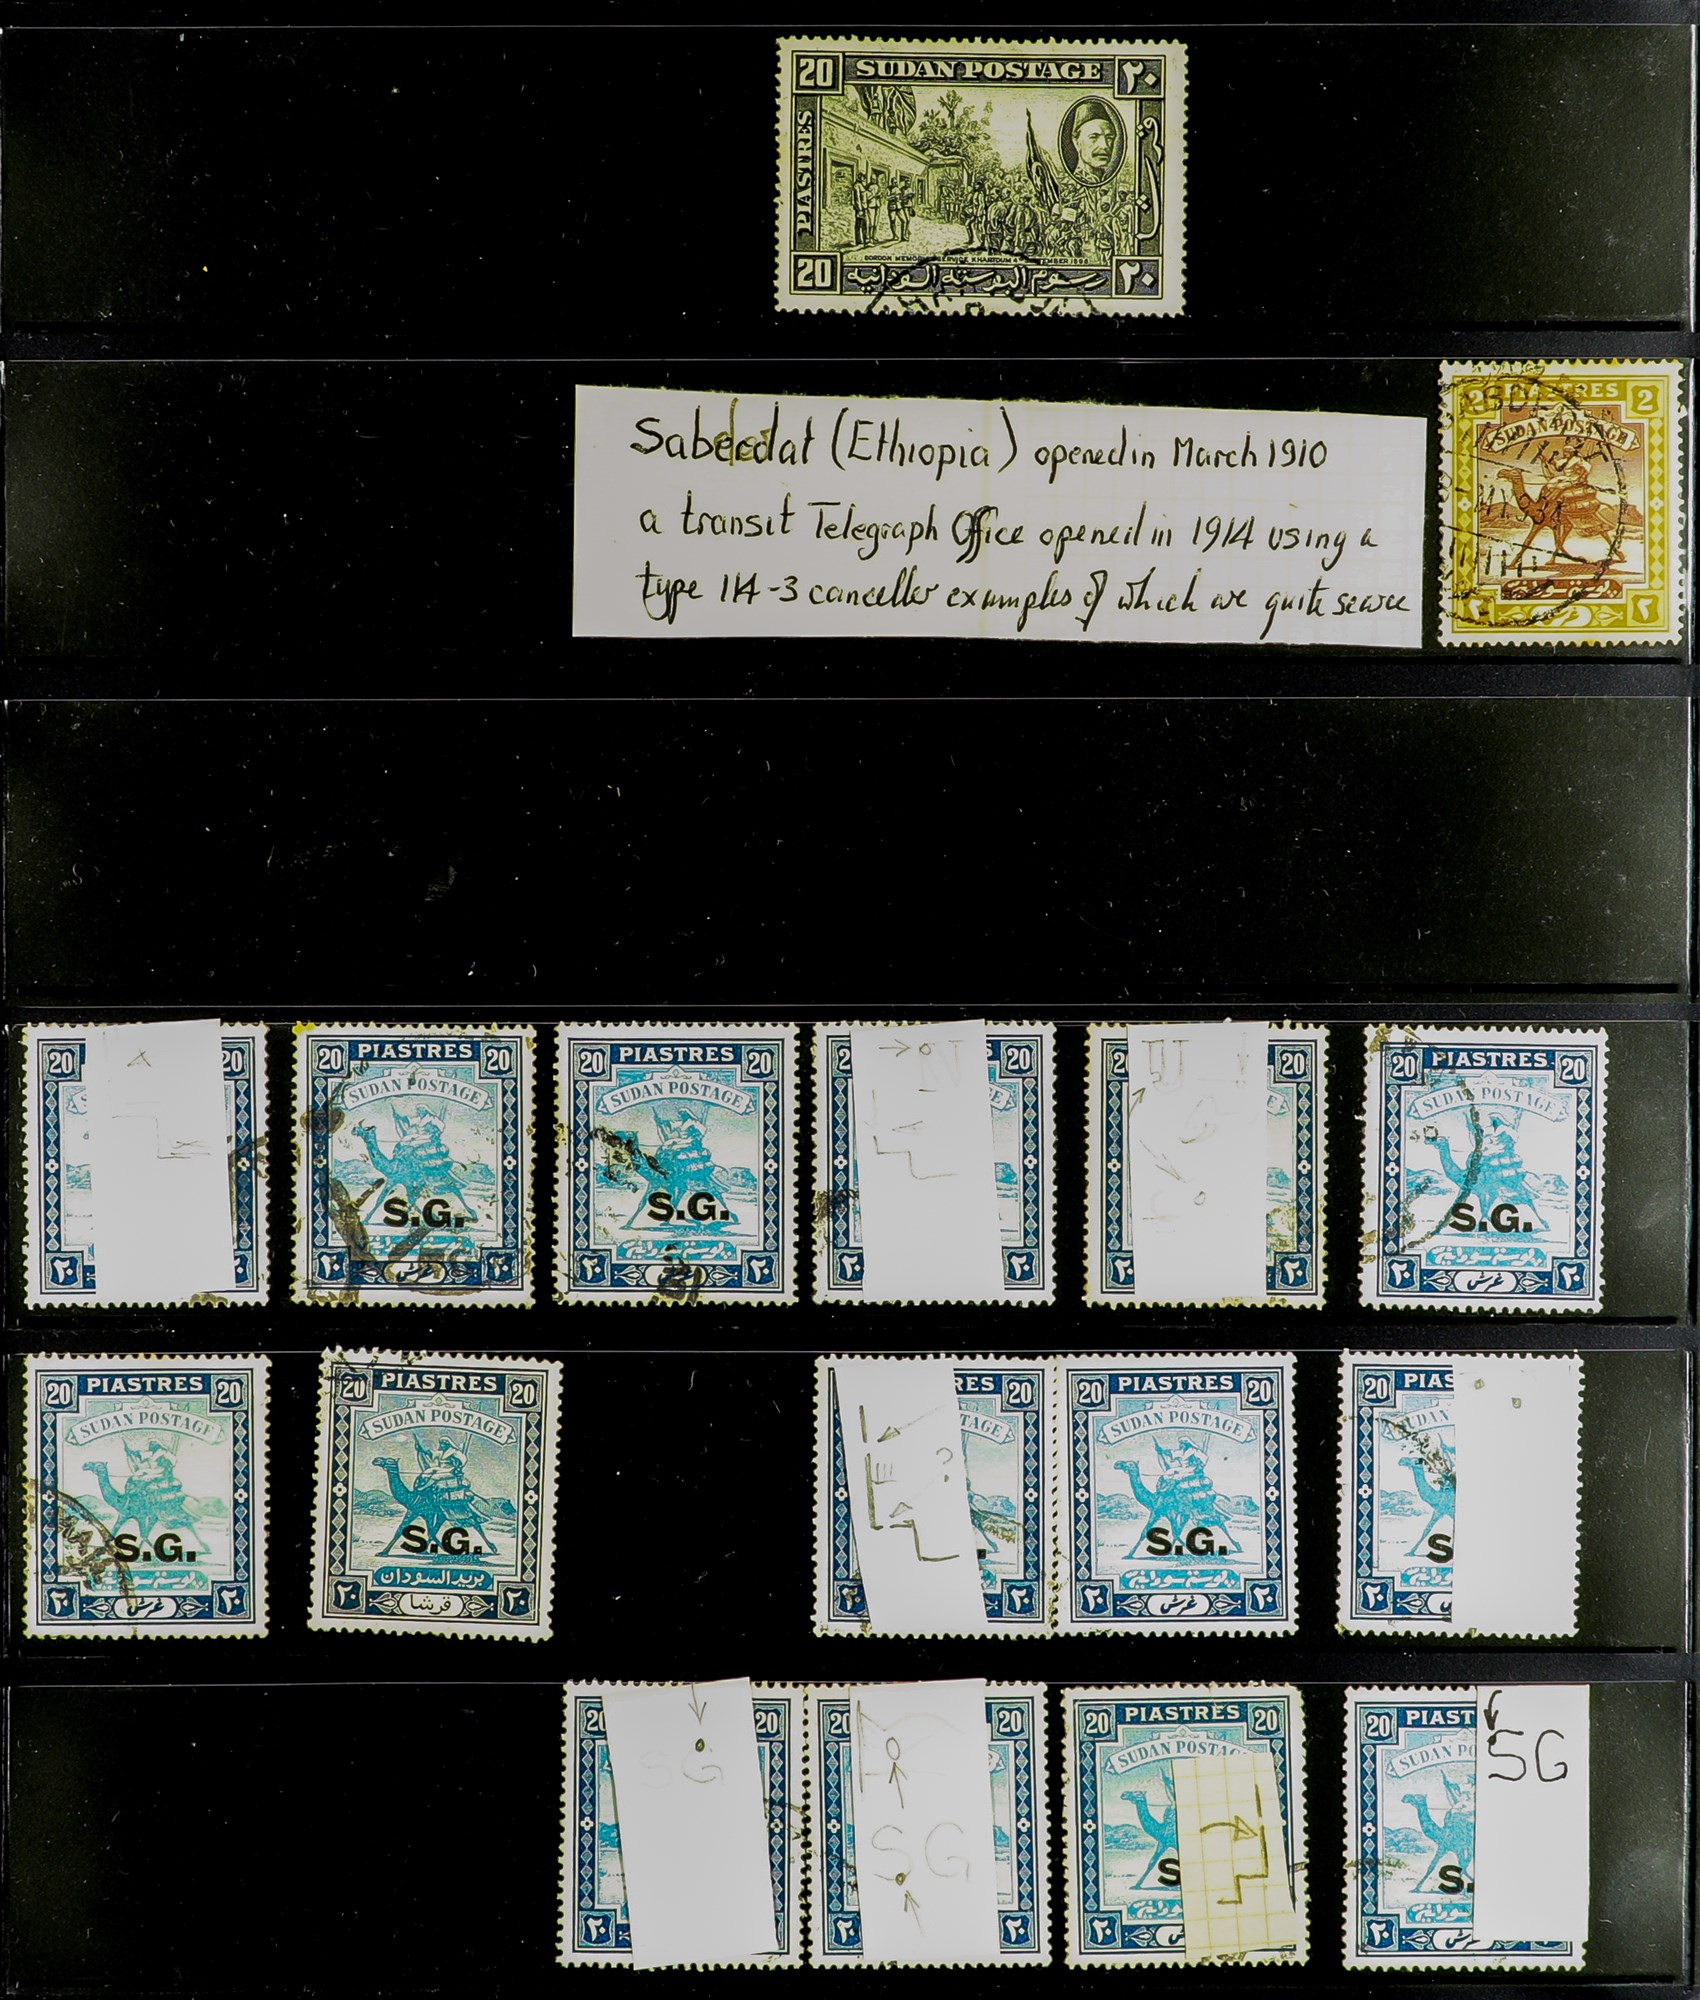 SUDAN 1898 - 1954 SPECIALISED USED RANGES IN 5 ALBUMS. Around 12,000 used stamps with many - Image 9 of 41